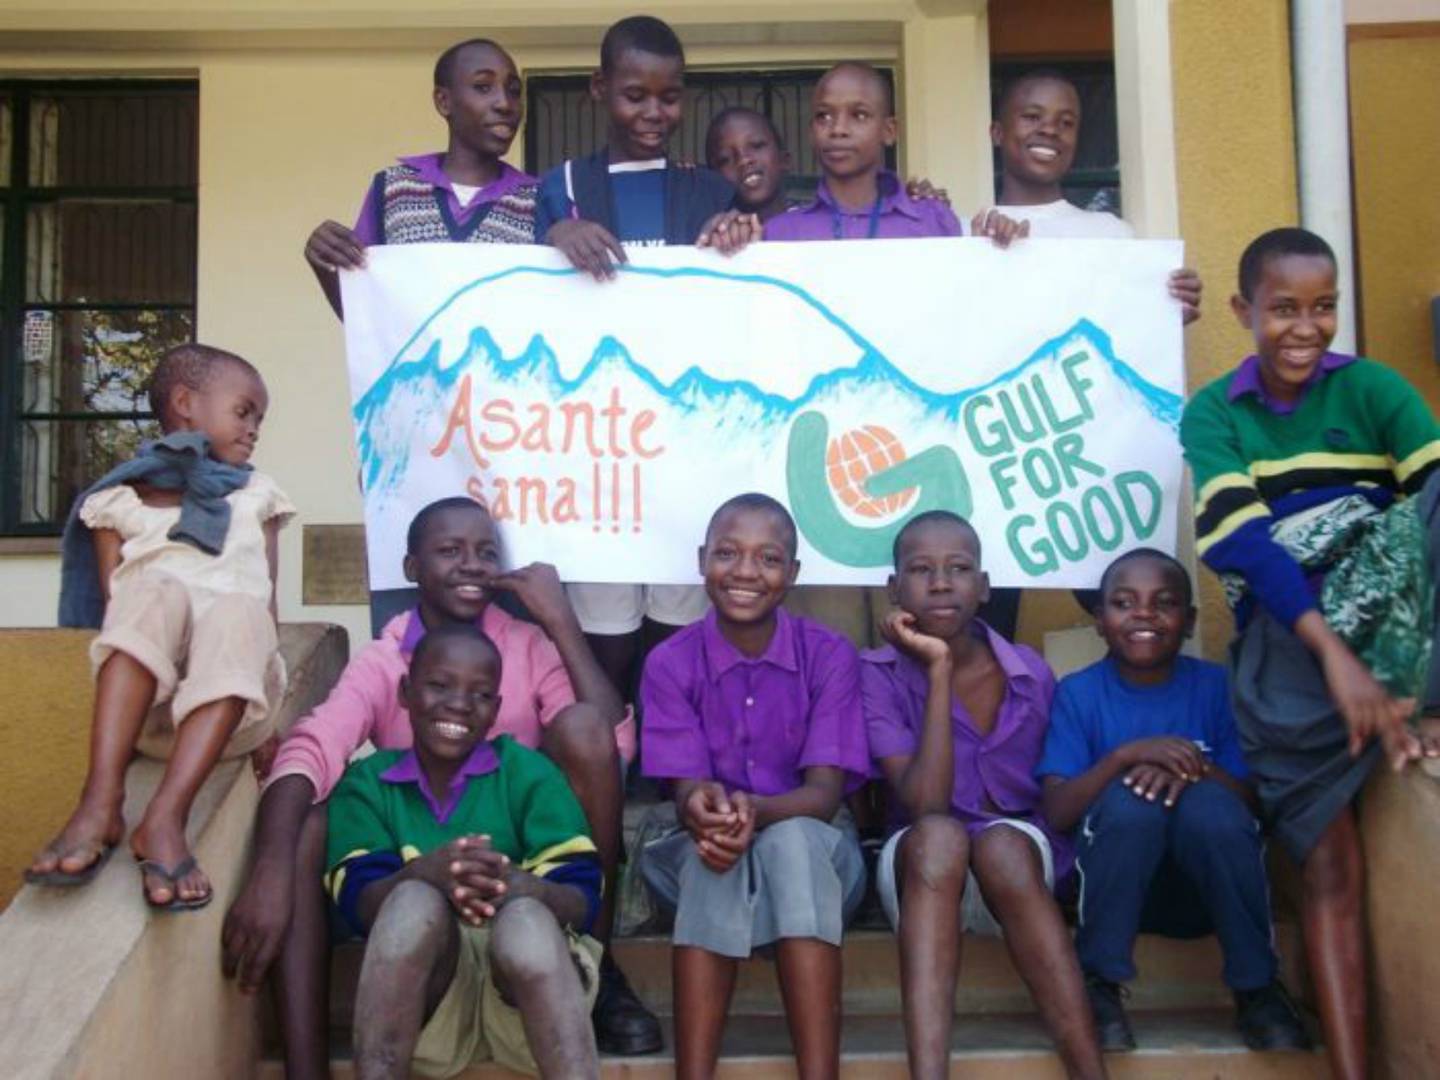 Gulf for Good raises money for children in deprived areas by organising events such as hiking and mountain climbing on famous peaks such as Everest and Kilimanjaro. Gulf for Good 